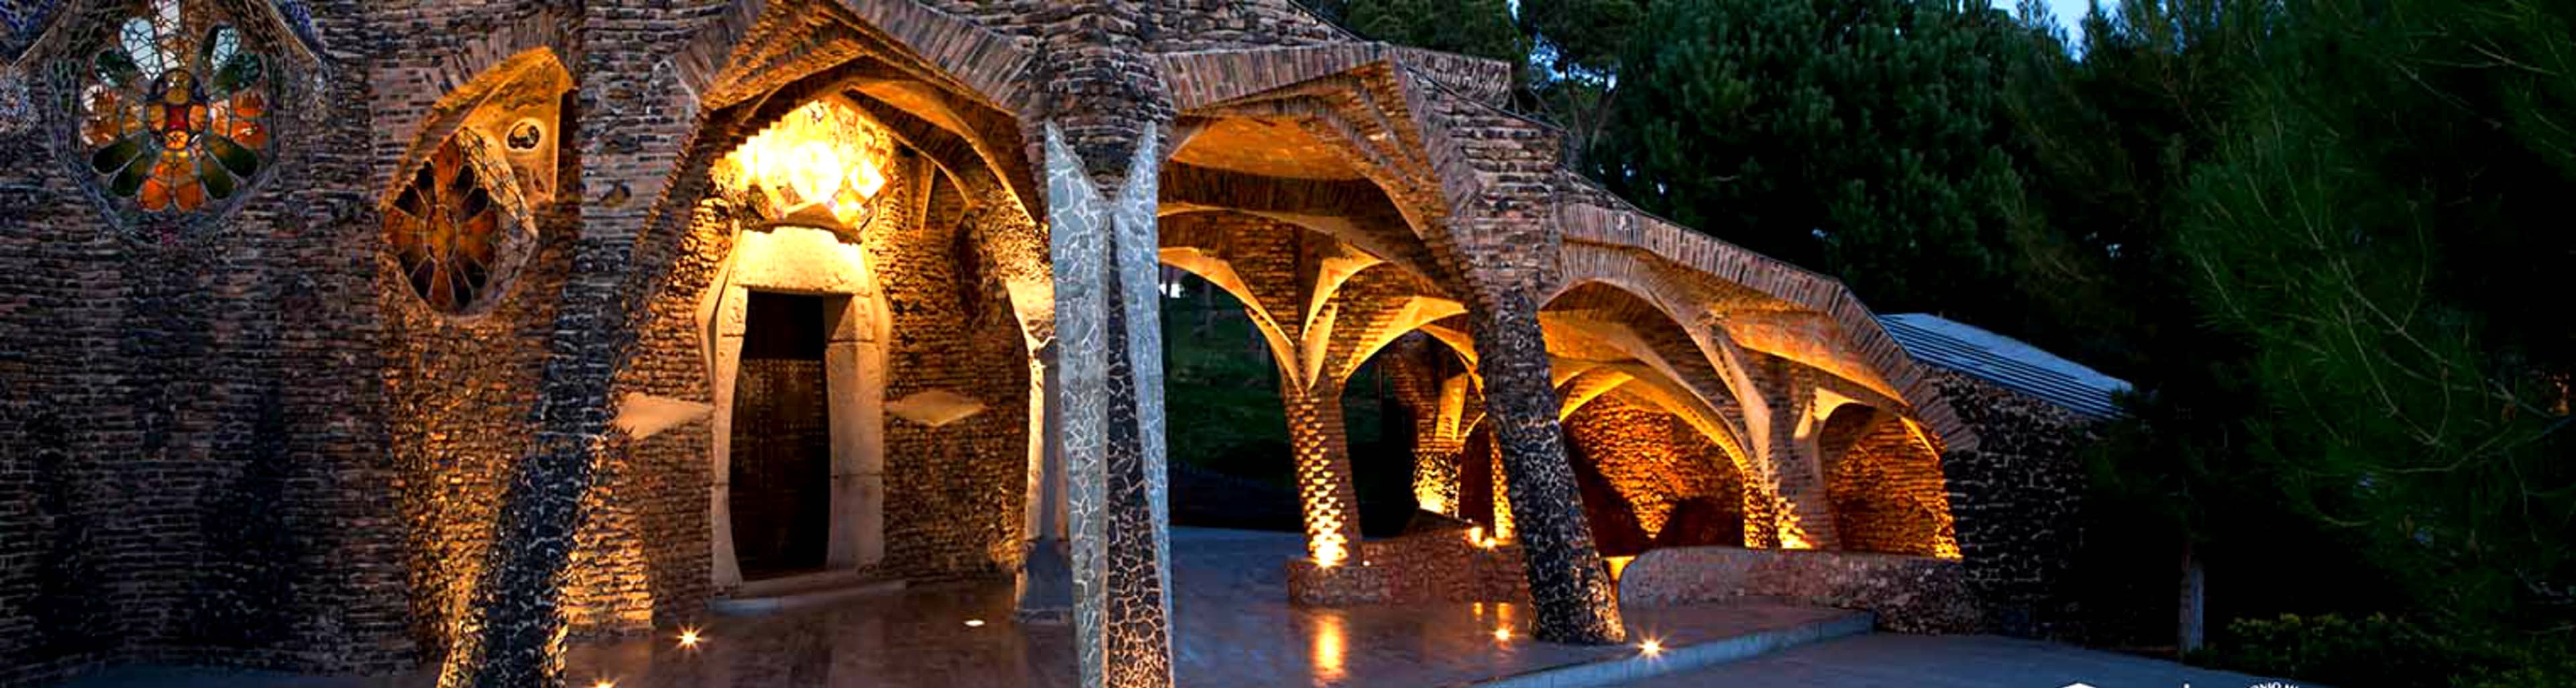 Gaudi's Crypt at Colonia Guell